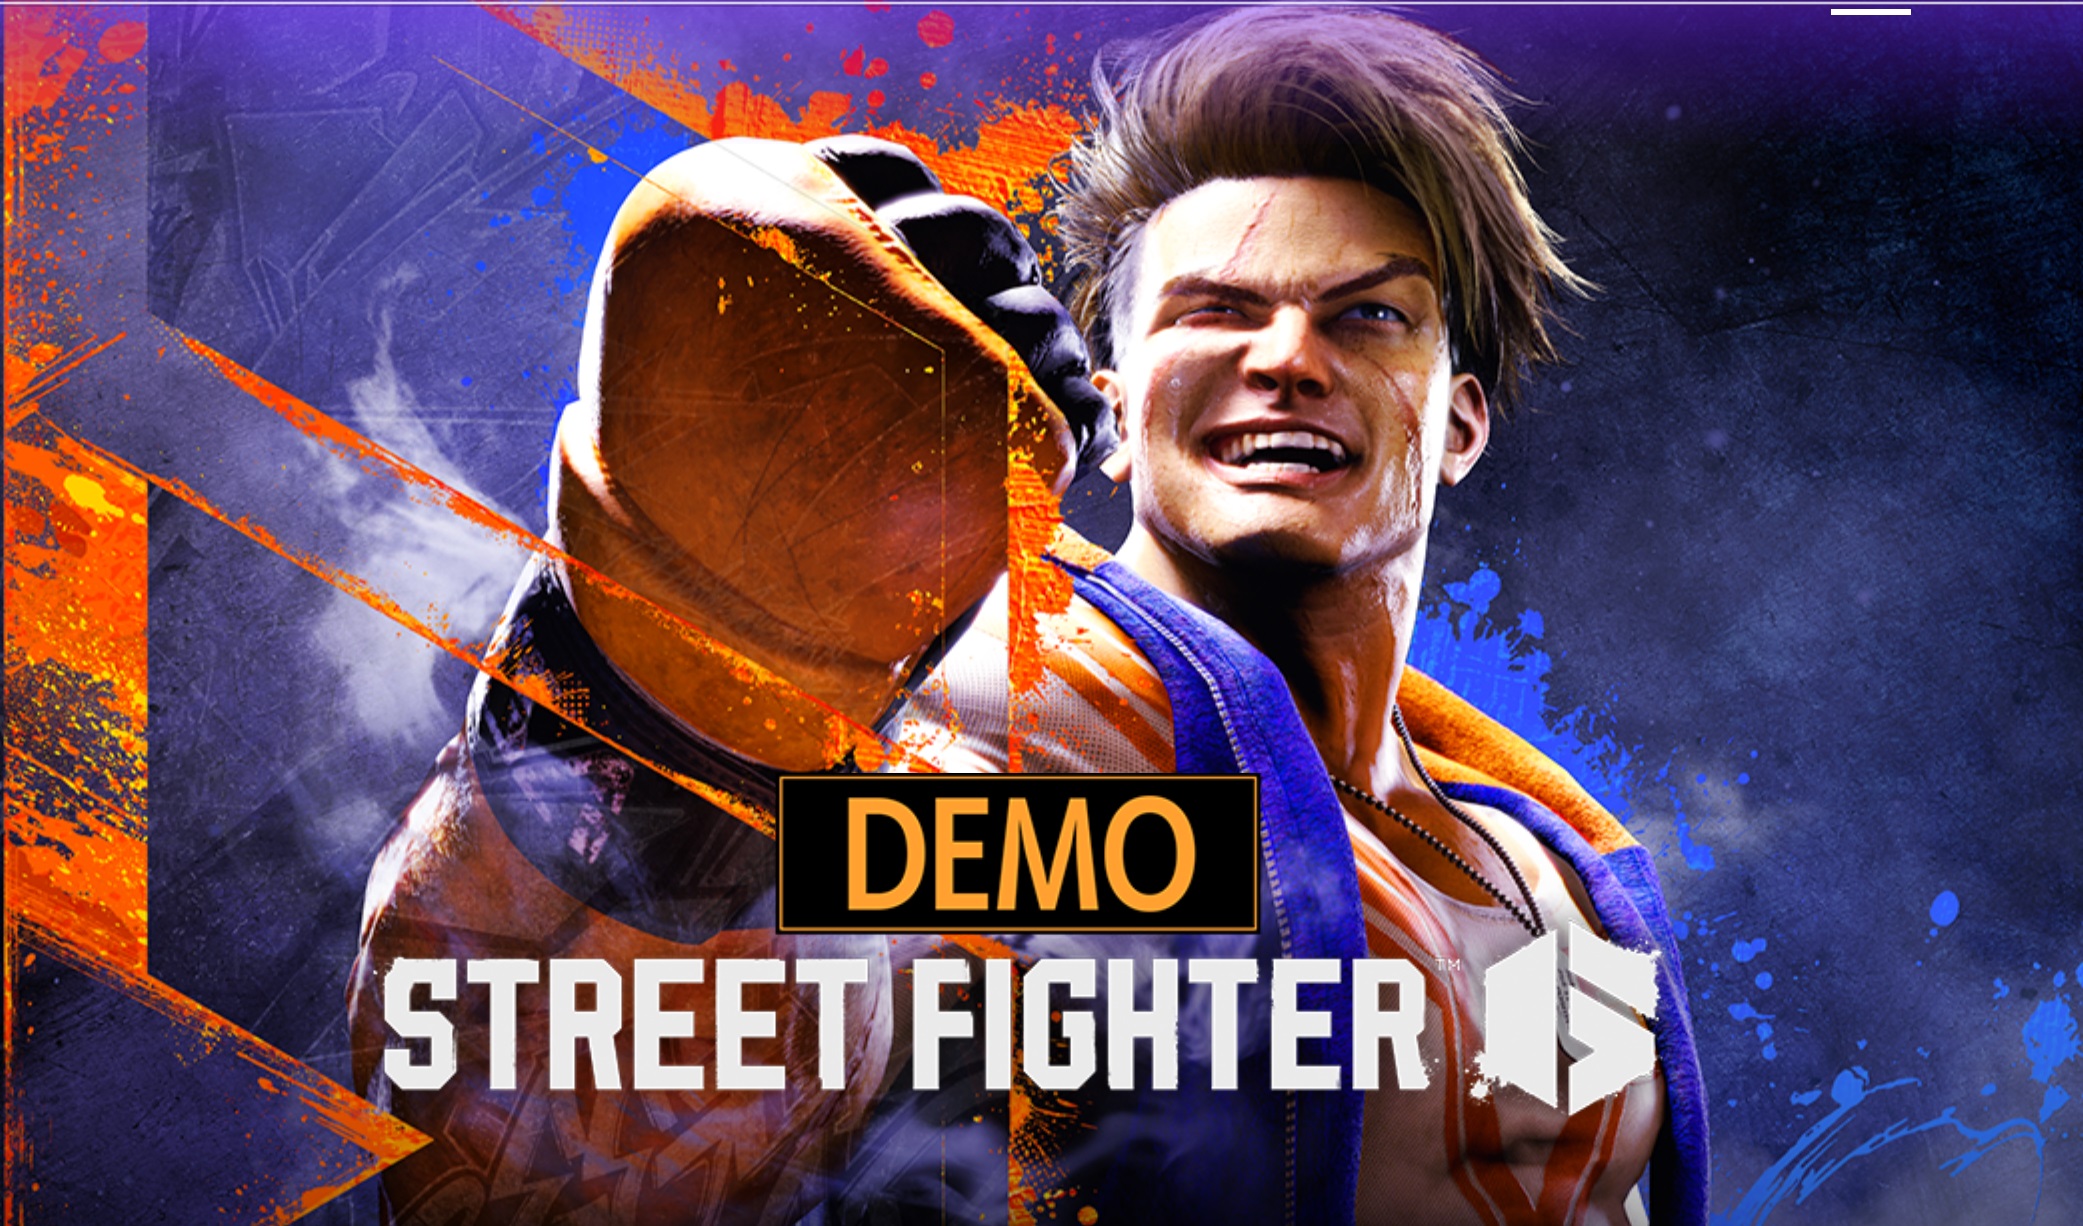 Street Fighter 6's Demo completely sold me on the PlayStation 4 Pro version  of the game but how does the base PS4 hold up?